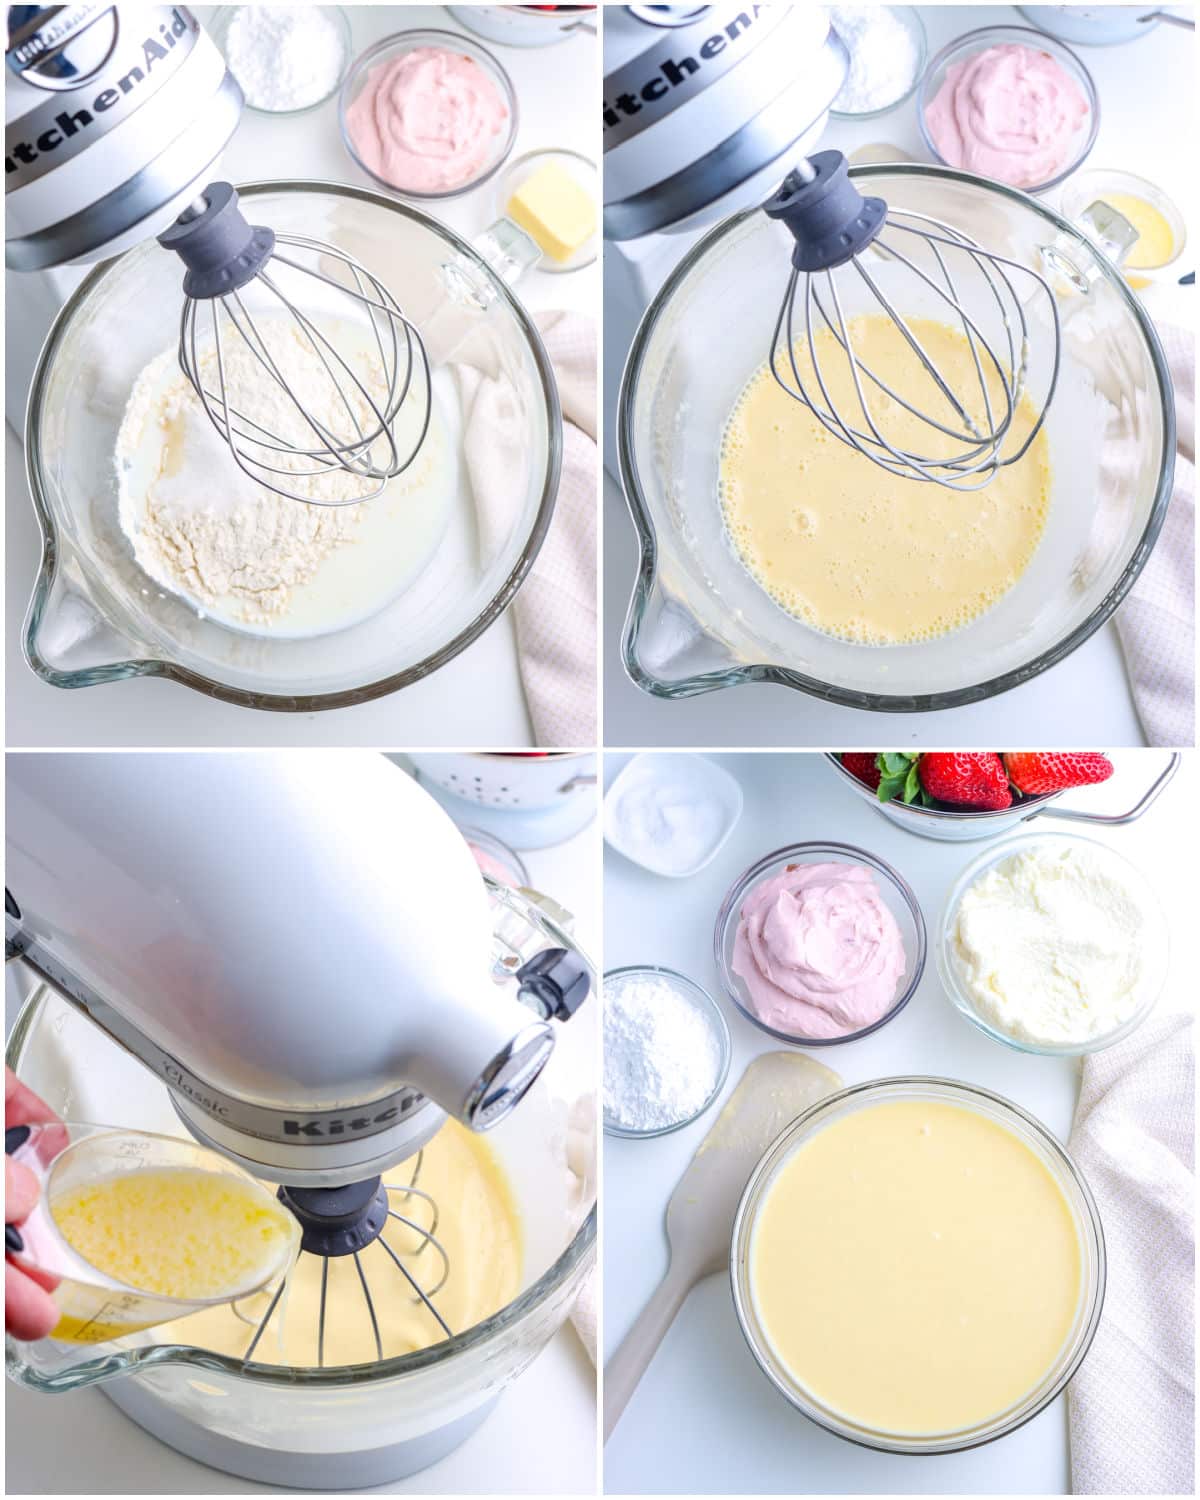 A picture collage showing how to make the crepe batter.